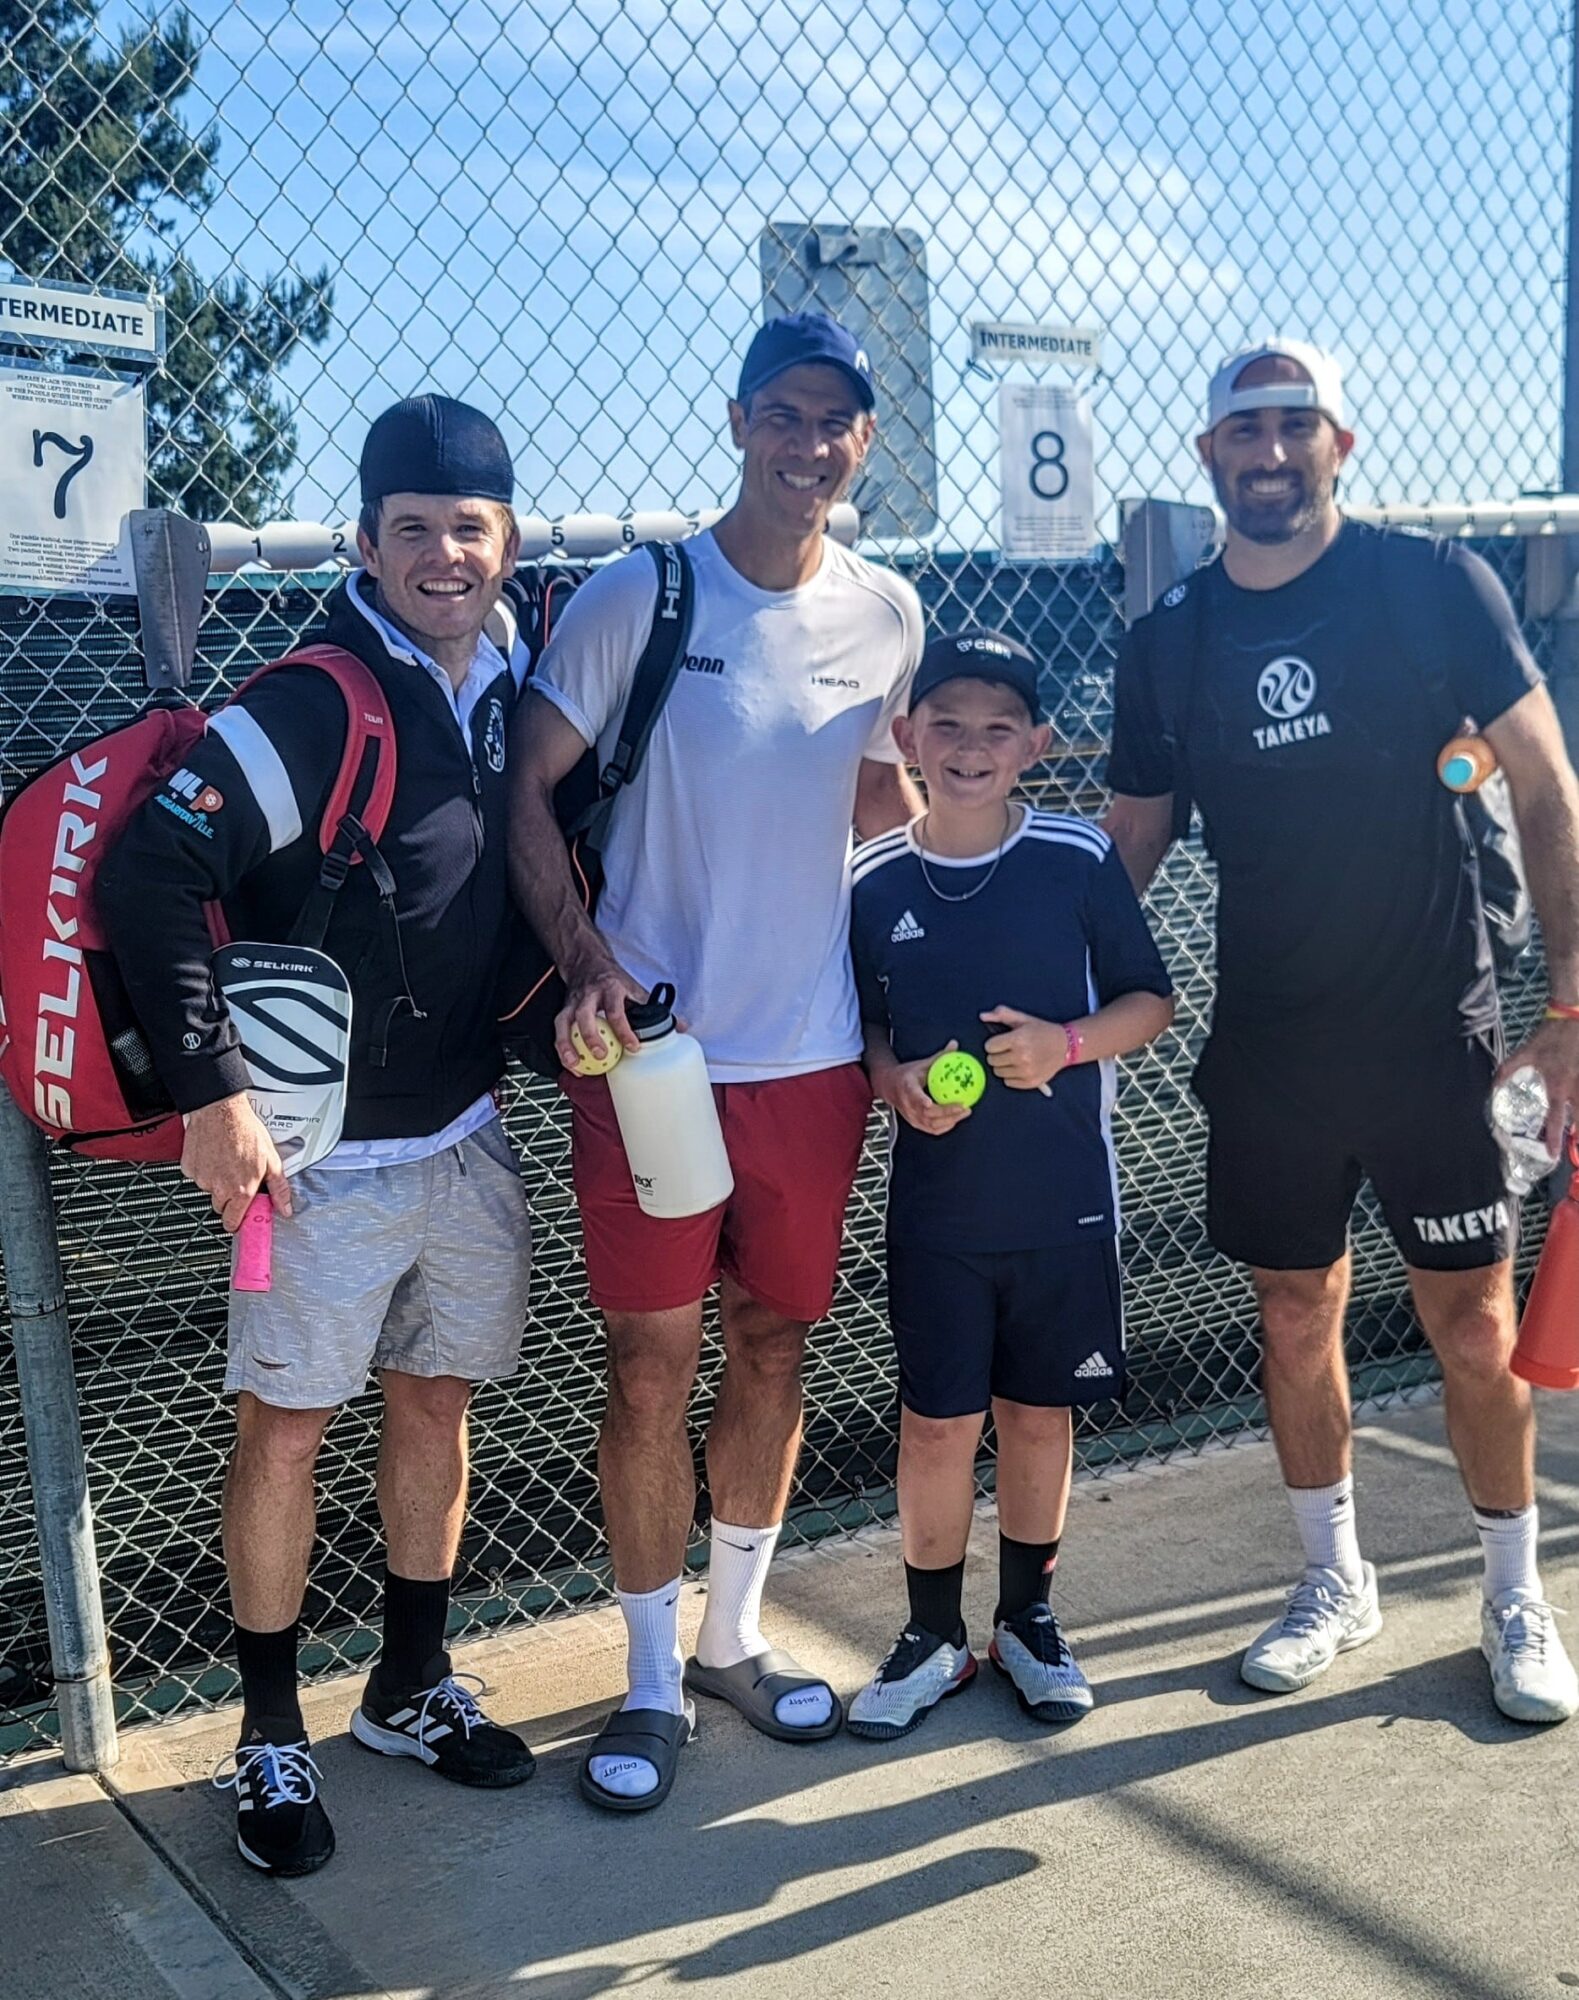 We met AJ Koller, Rob Nunnery, and Erik Lange at the local pickleball courts in San Clemente